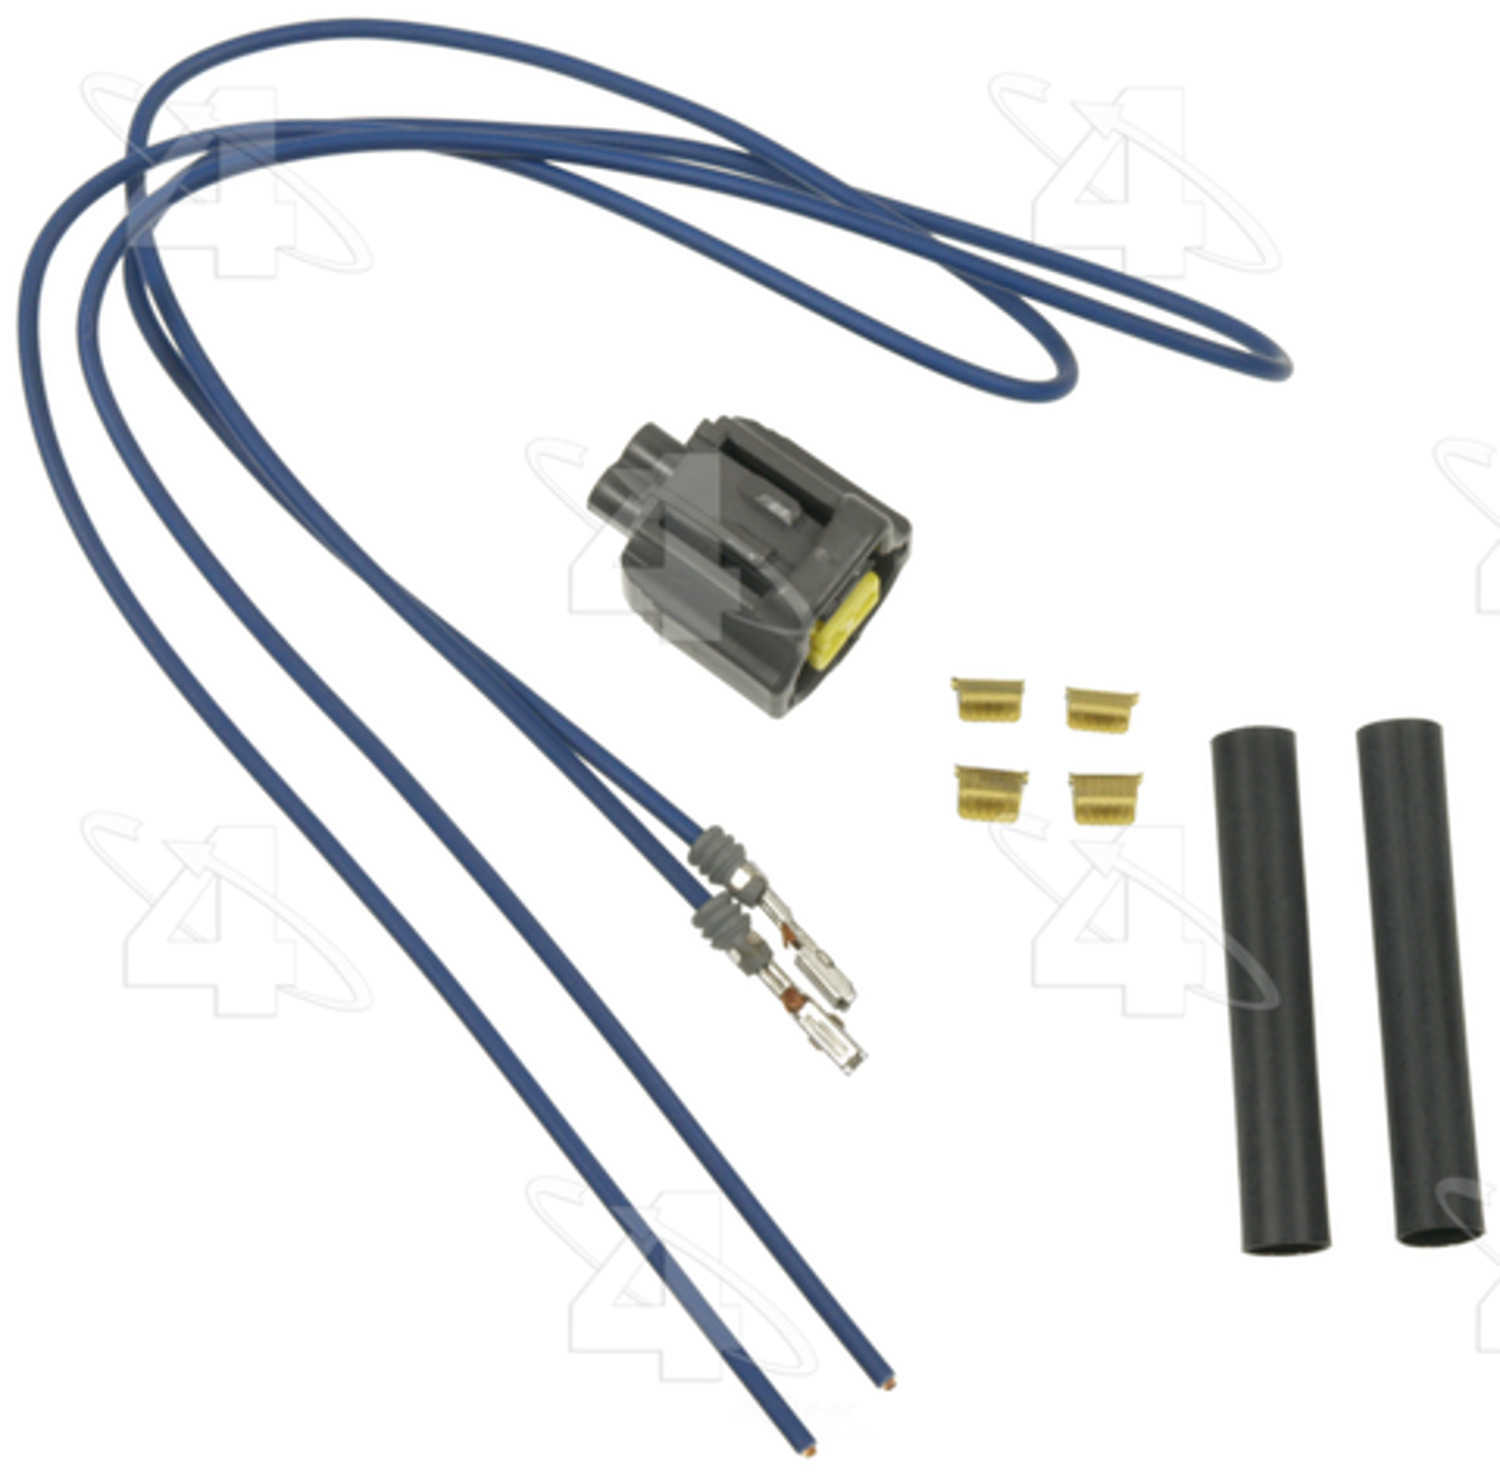 FOUR SEASONS - A/C Compressor Cut-Out Switch Harness Connector - FSE 37287